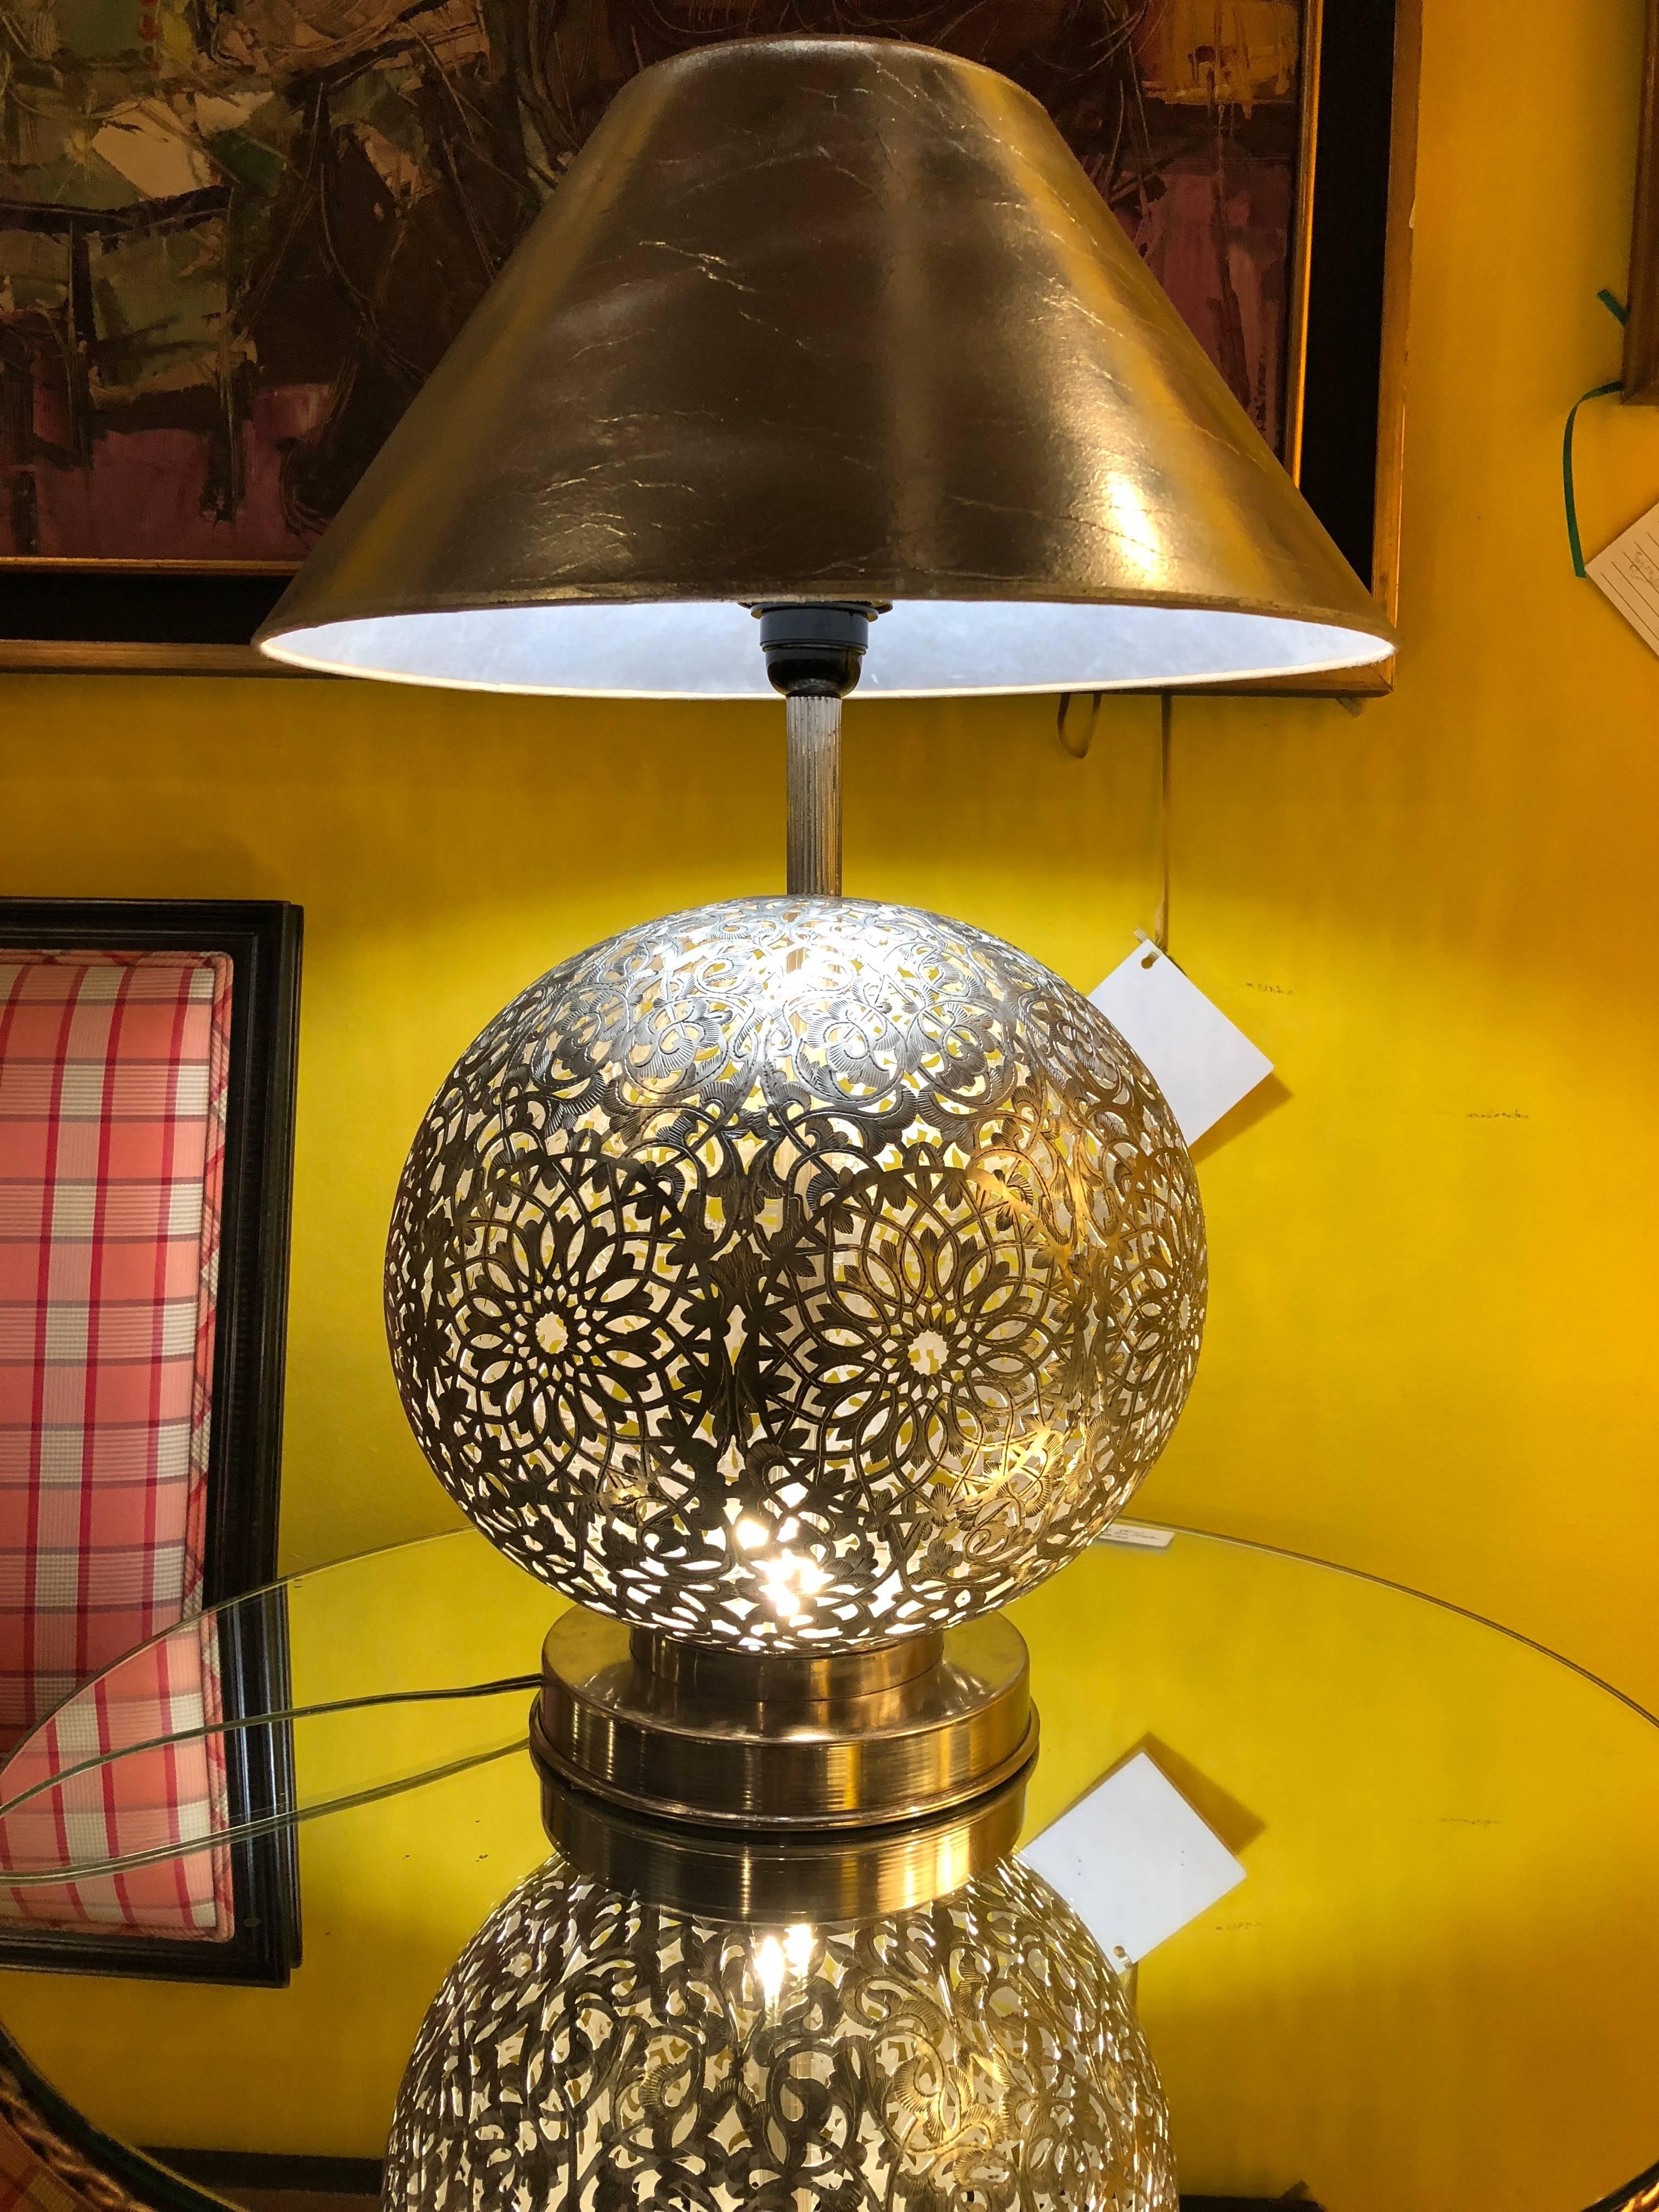 Our round shaped metallic lamps from Fez are beautifully created in the workshop of master artisans and feature silver metal and intricate hand-tooled filigree work. The lamp produces a diffuse, filtered light, creating a soft, soothing effect.